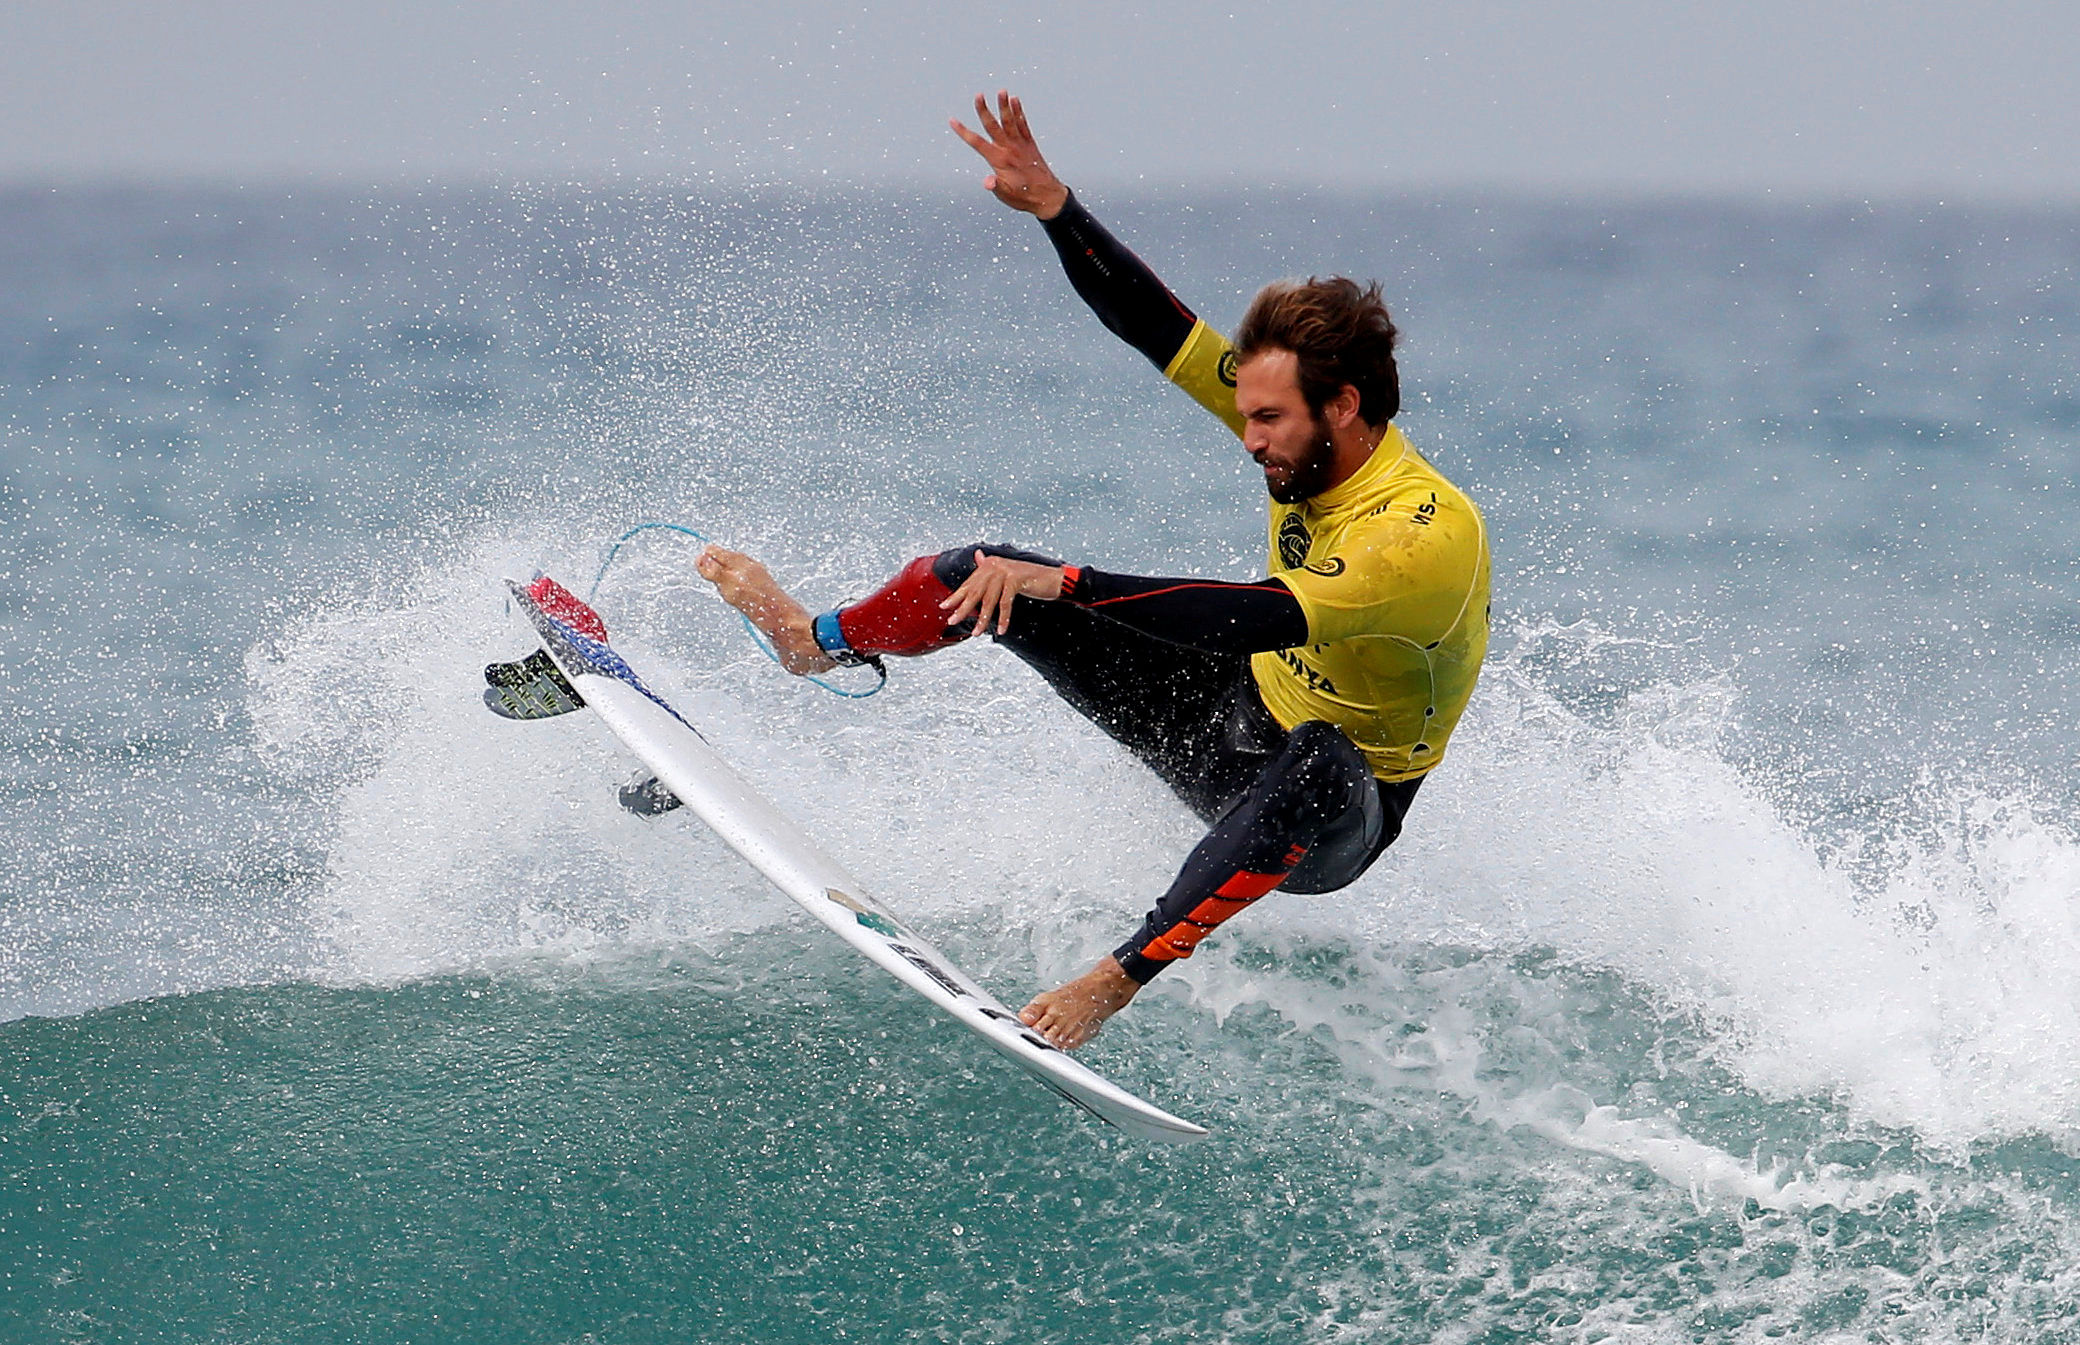 Facebook nabs exclusive streaming rights for pro surfing